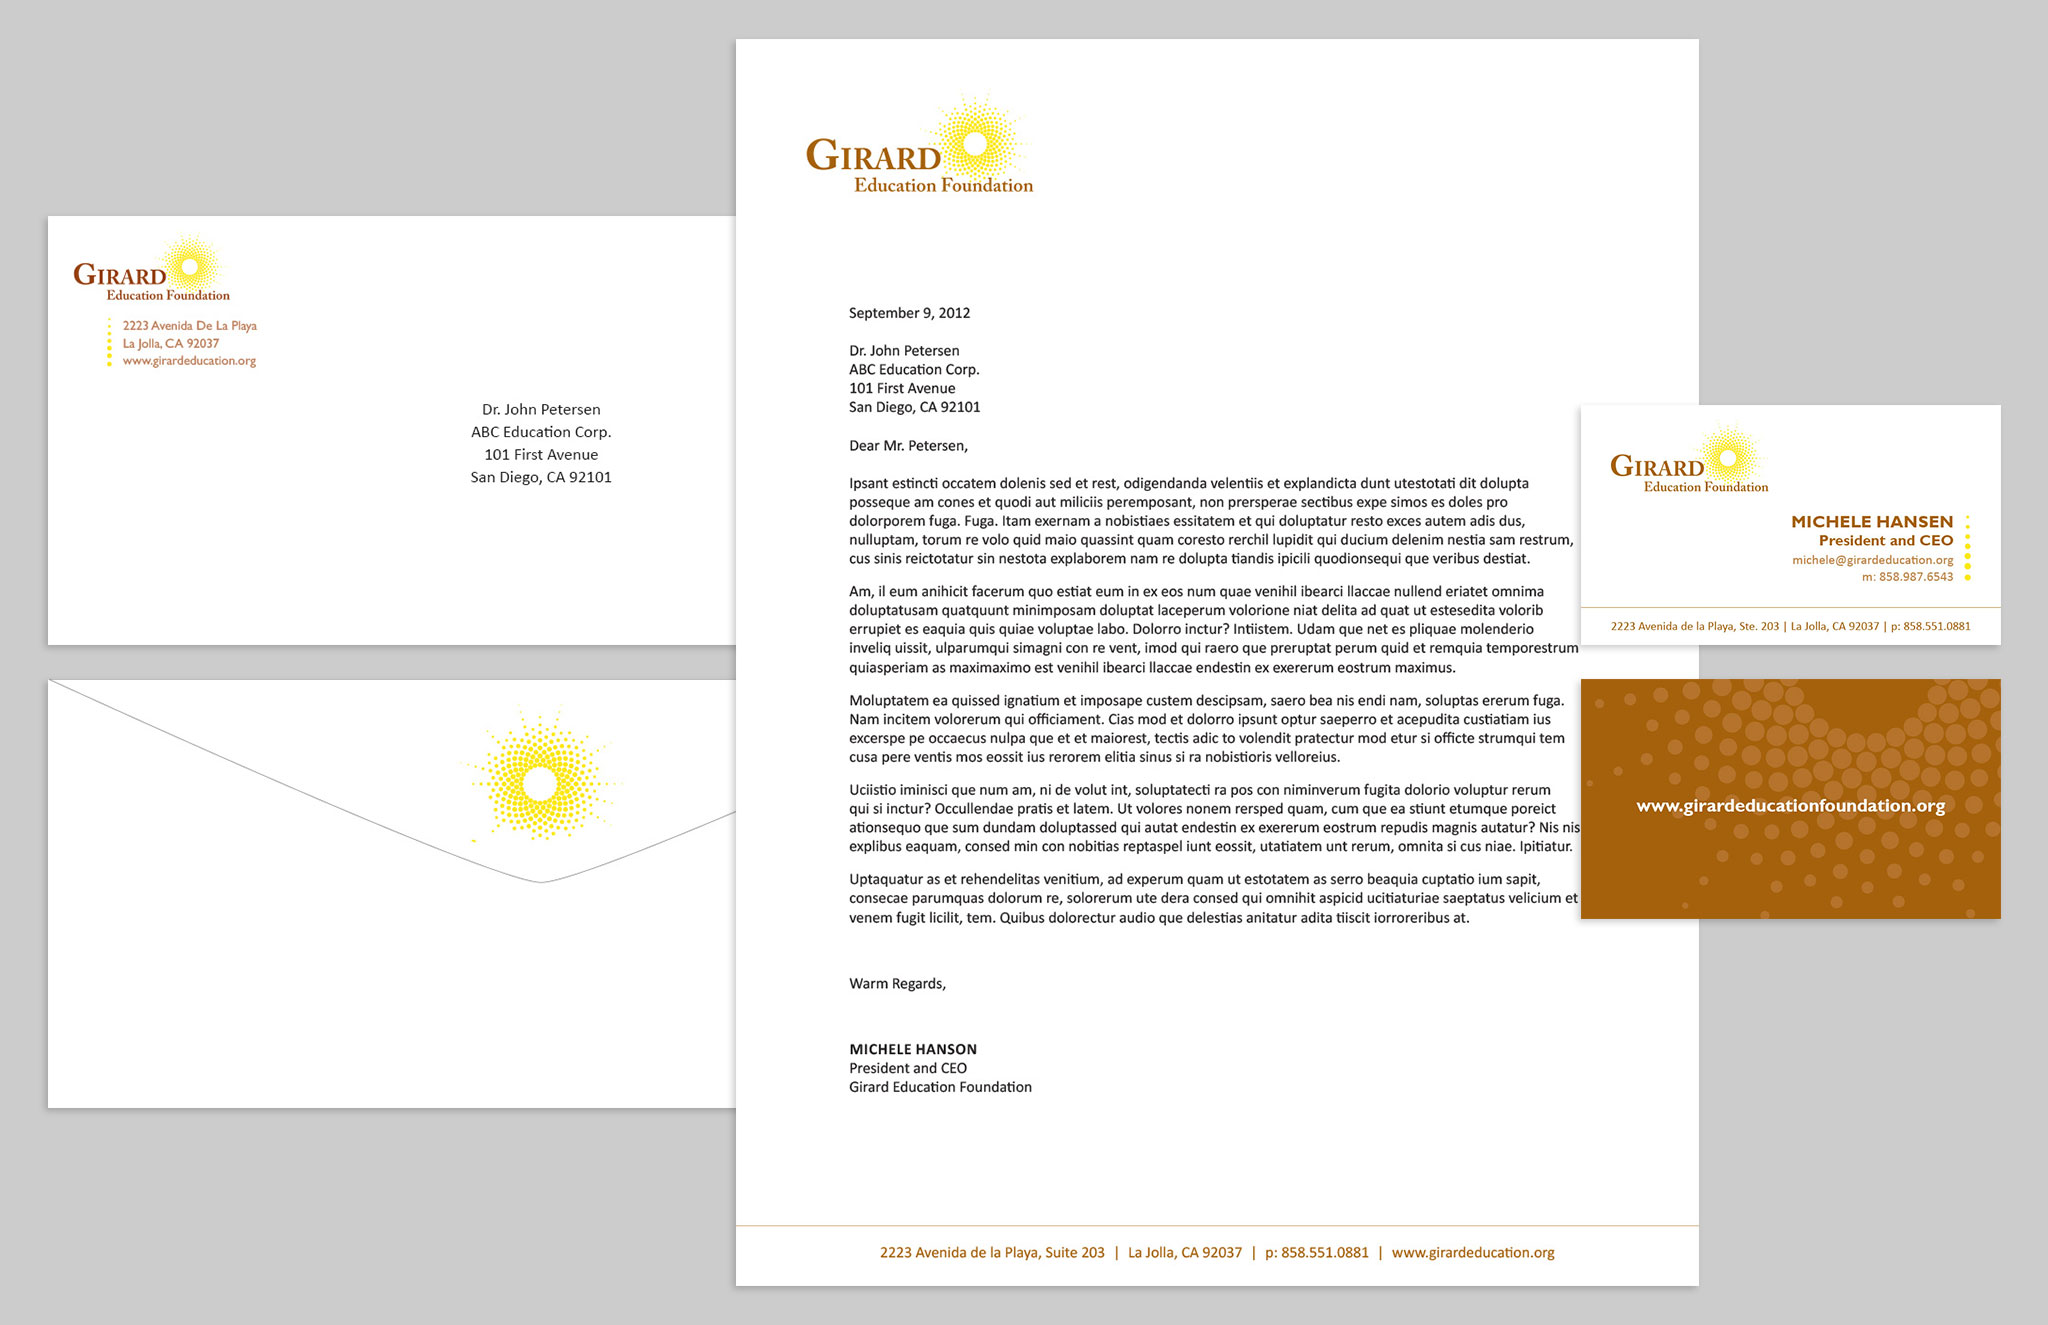 Girard Education Foundation identity suite by Ashley Lewis